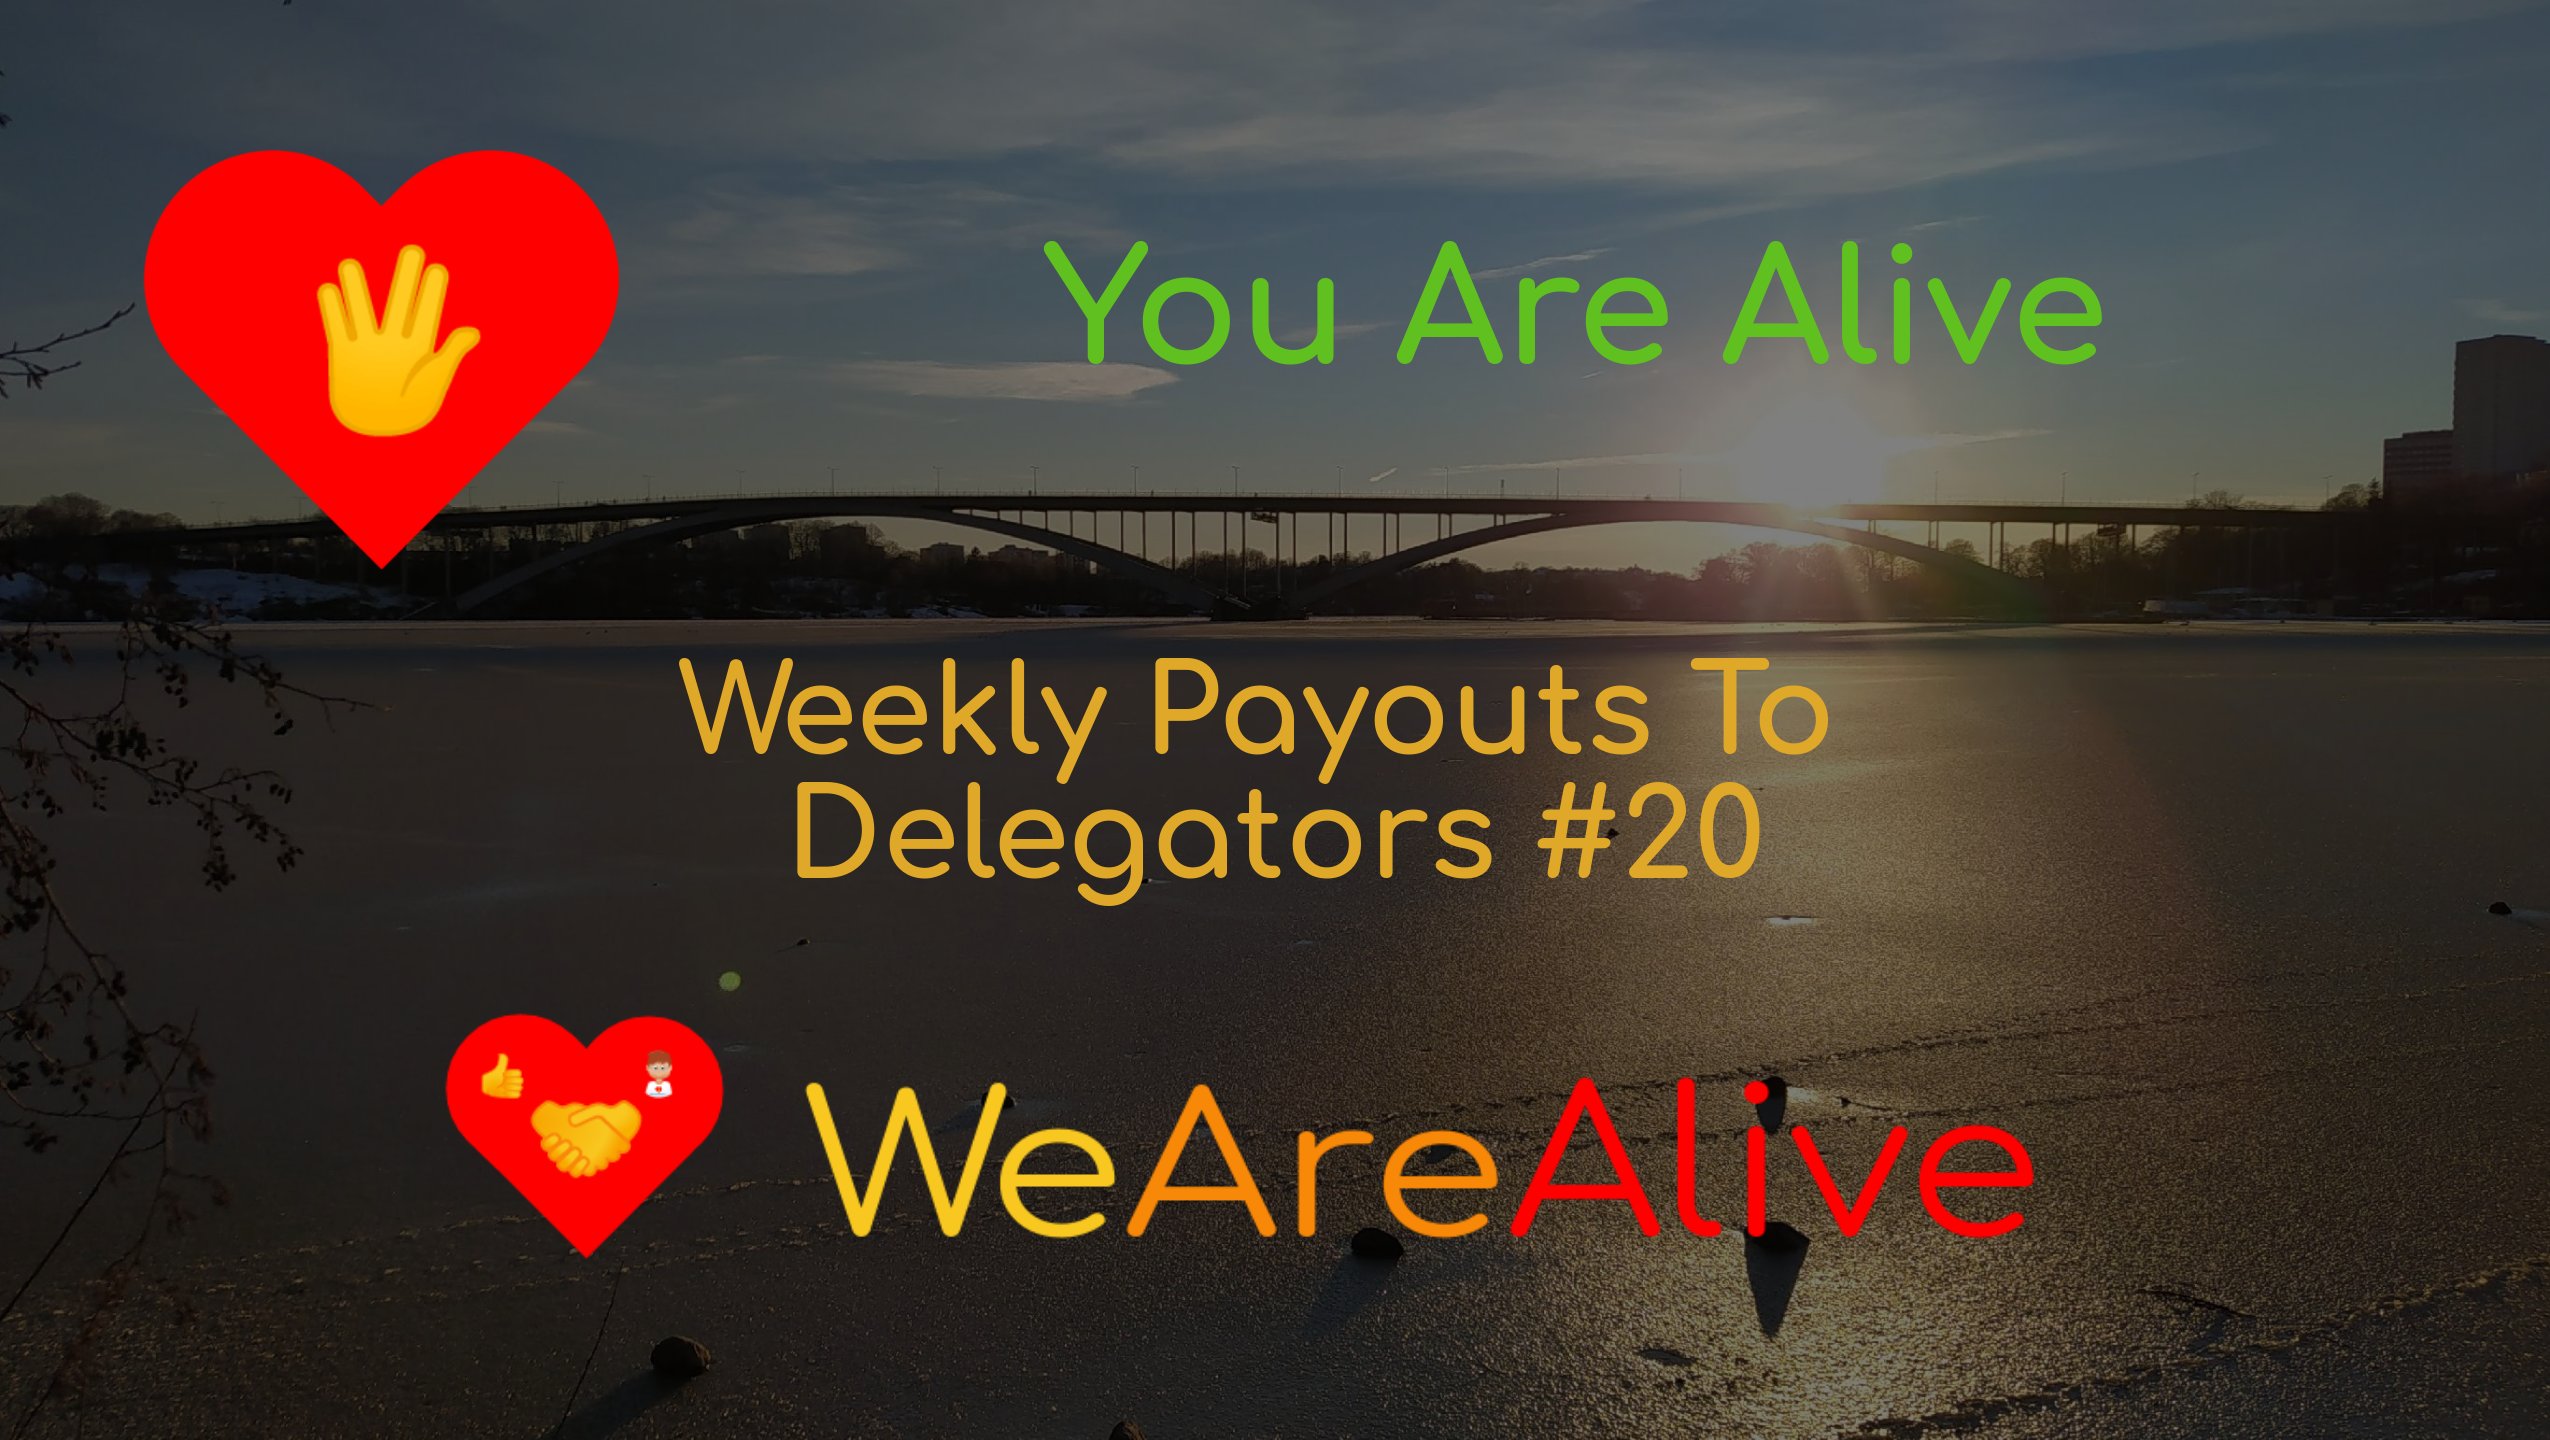 @youarealive/you-are-alive-weekly-payouts-to-delegators-20